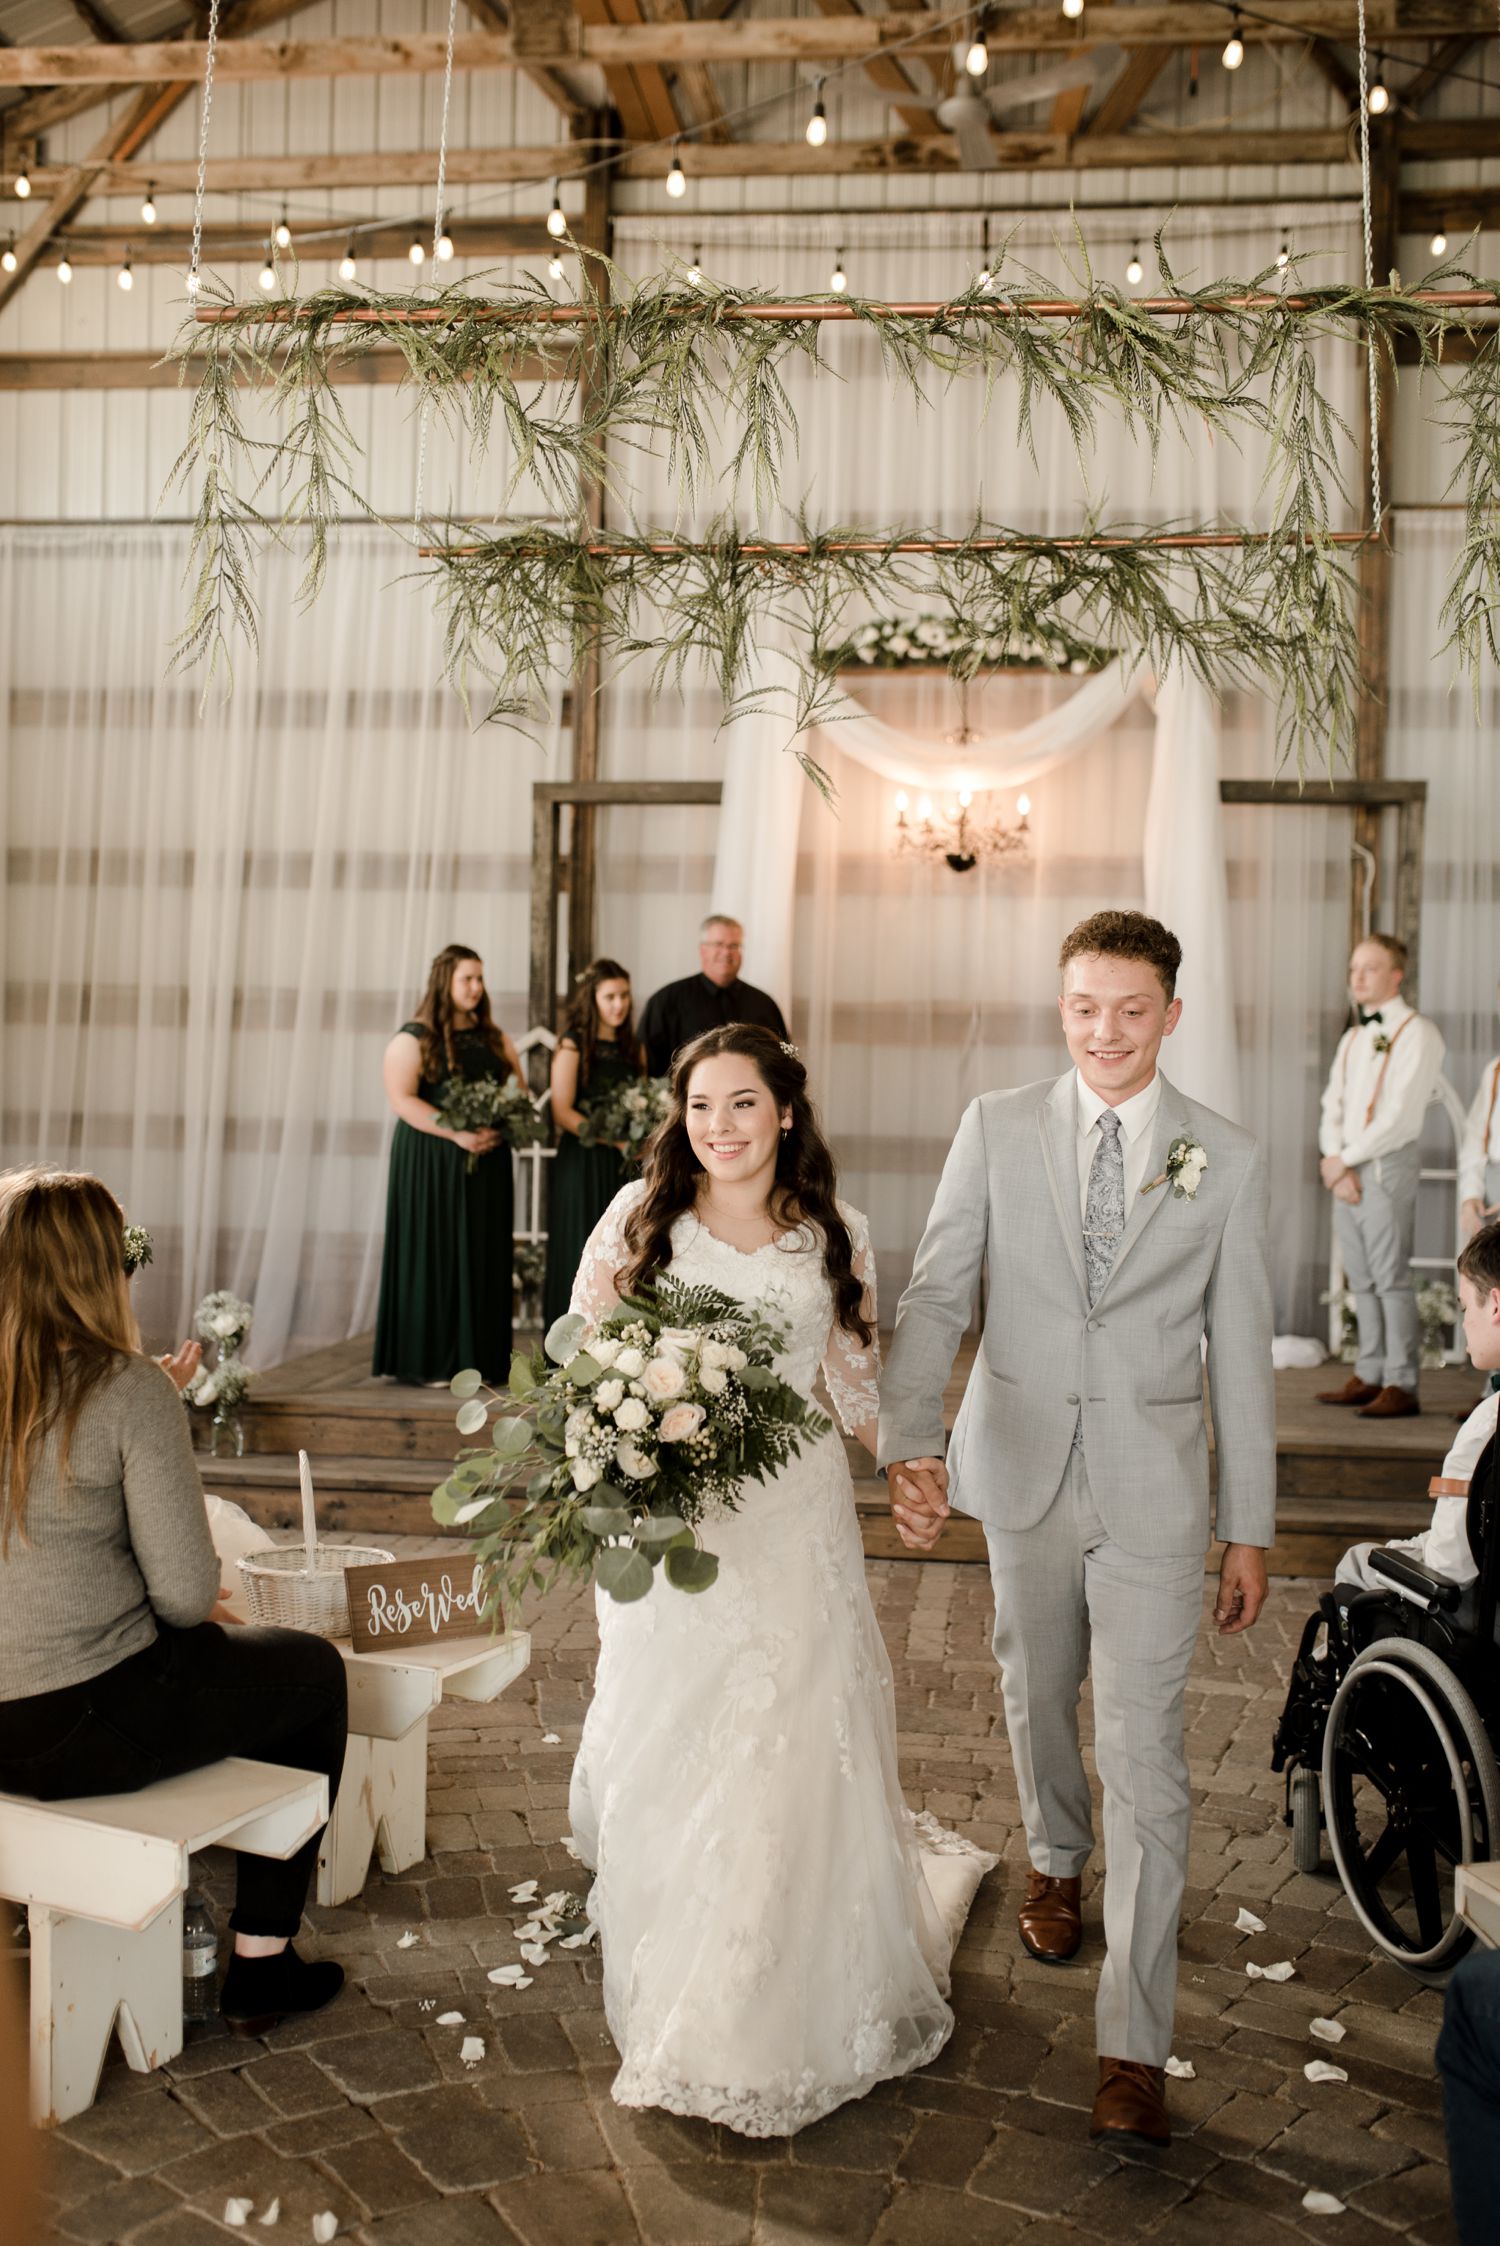 The rustic wedding barn wedding in Steinbach Manitoba in fall, photographed by Vanessa Renae Photography